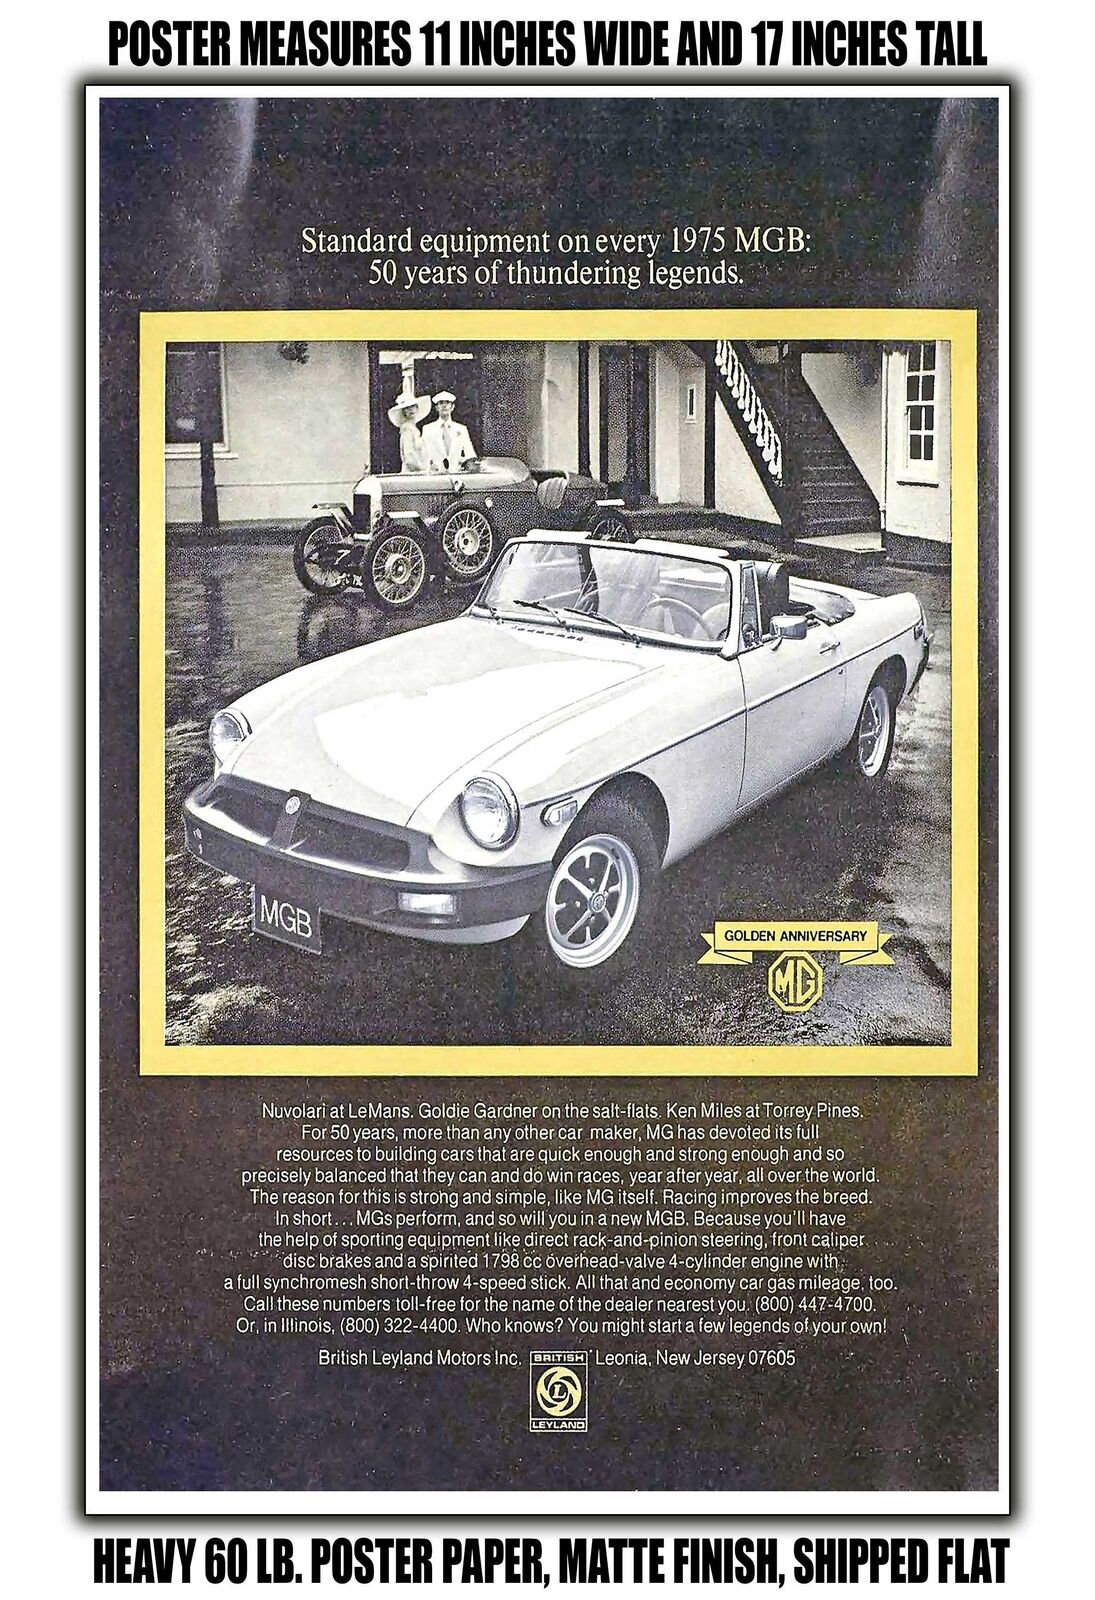 11x17 POSTER - 1975 MG MGB 50 Years of Thundering Legends